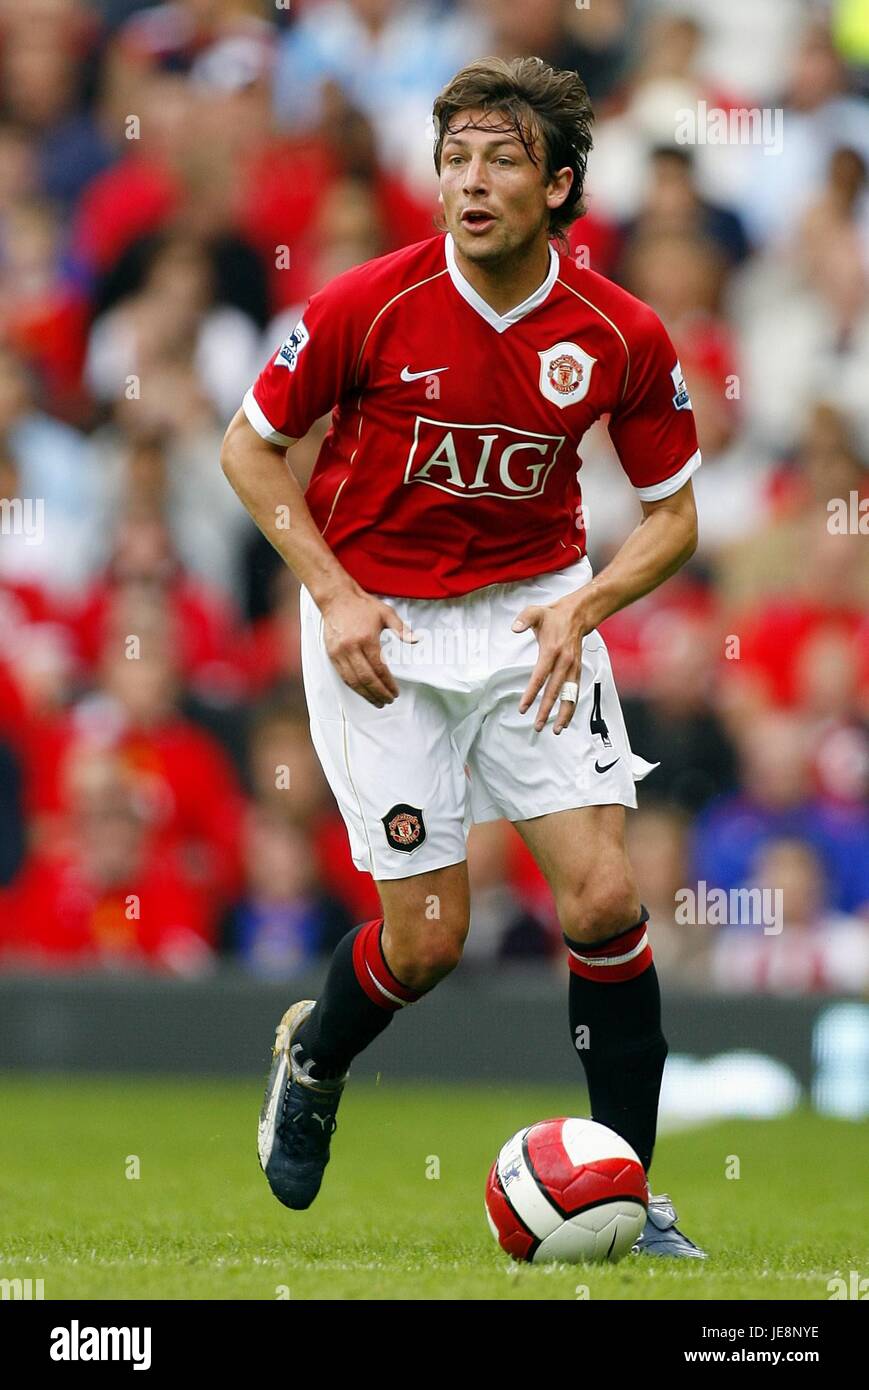 GABRIEL HEINZE MANCHESTER UNITED FC OLD TRAFFORD MANCHESTER ENGLAND 12 August 2006 Stock Photo